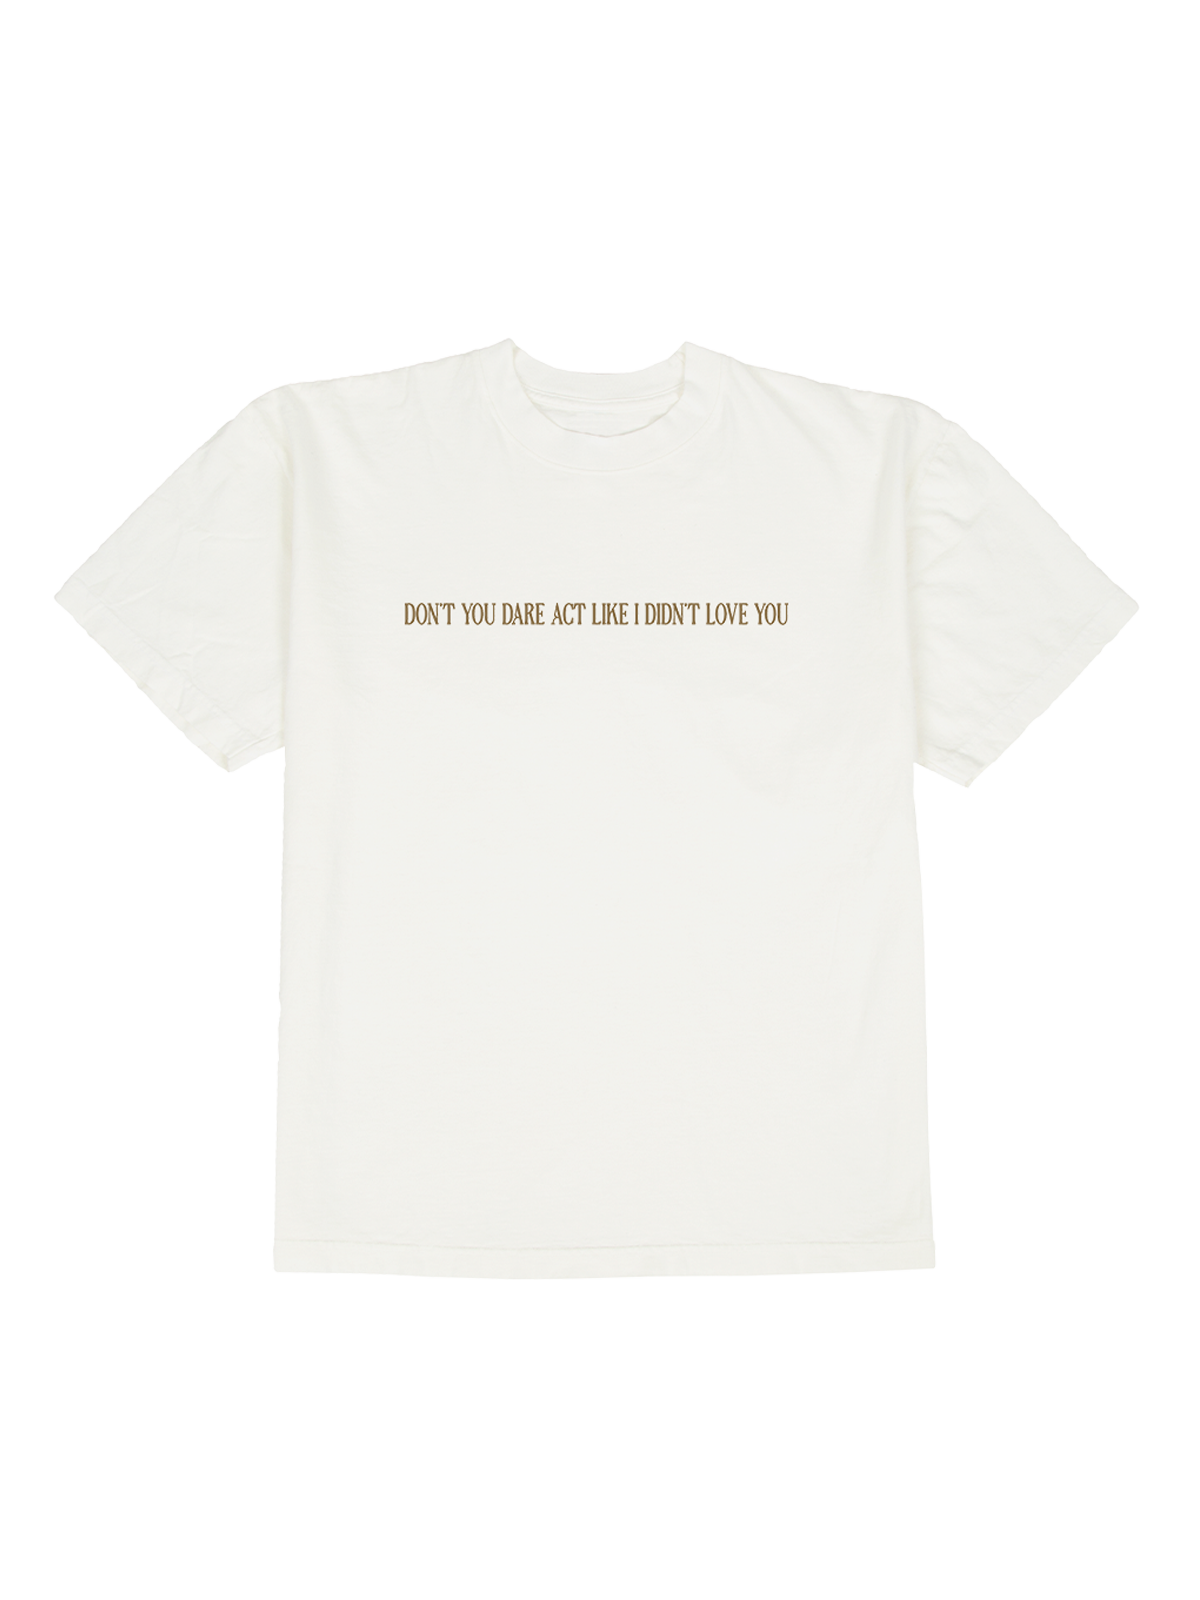 Don't you dare act like I didn't love you crisis tee front Joshua Bassett